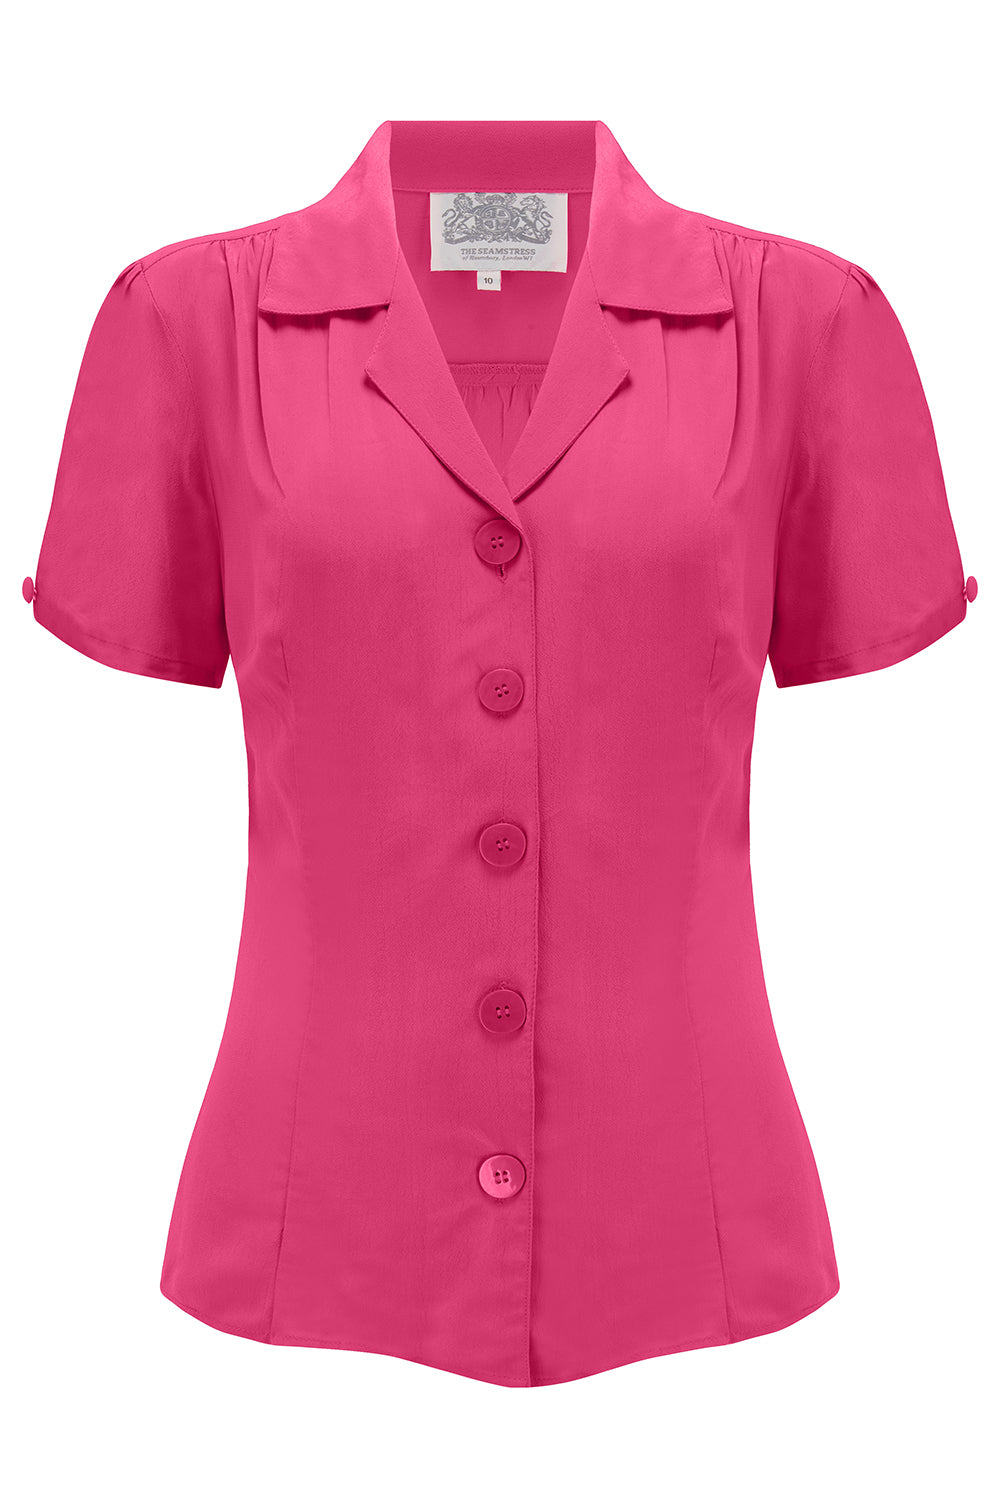 "Grace" Blouse in Raspberry Pink, Authentic & Classic 1940s Vintage Style